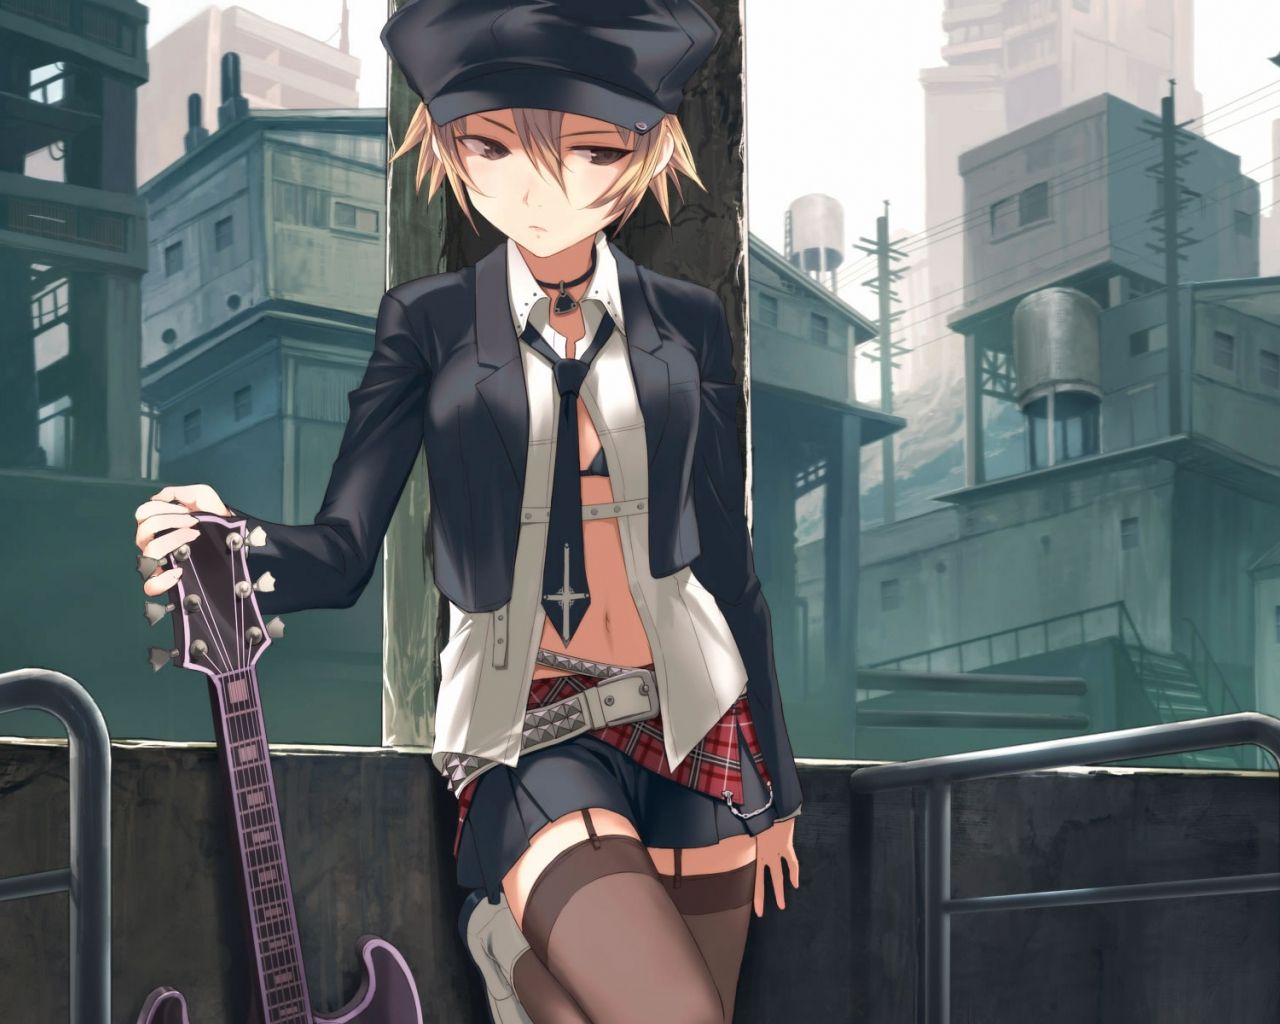 Free download Girl With A Guitar Anime Wallpaper Image featuring General [1600x1200] for your Desktop, Mobile & Tablet. Explore Anime Tomboy Wallpaper. Anime Tomboy Wallpaper, Tomboy Wallpaper, Tomboy Background